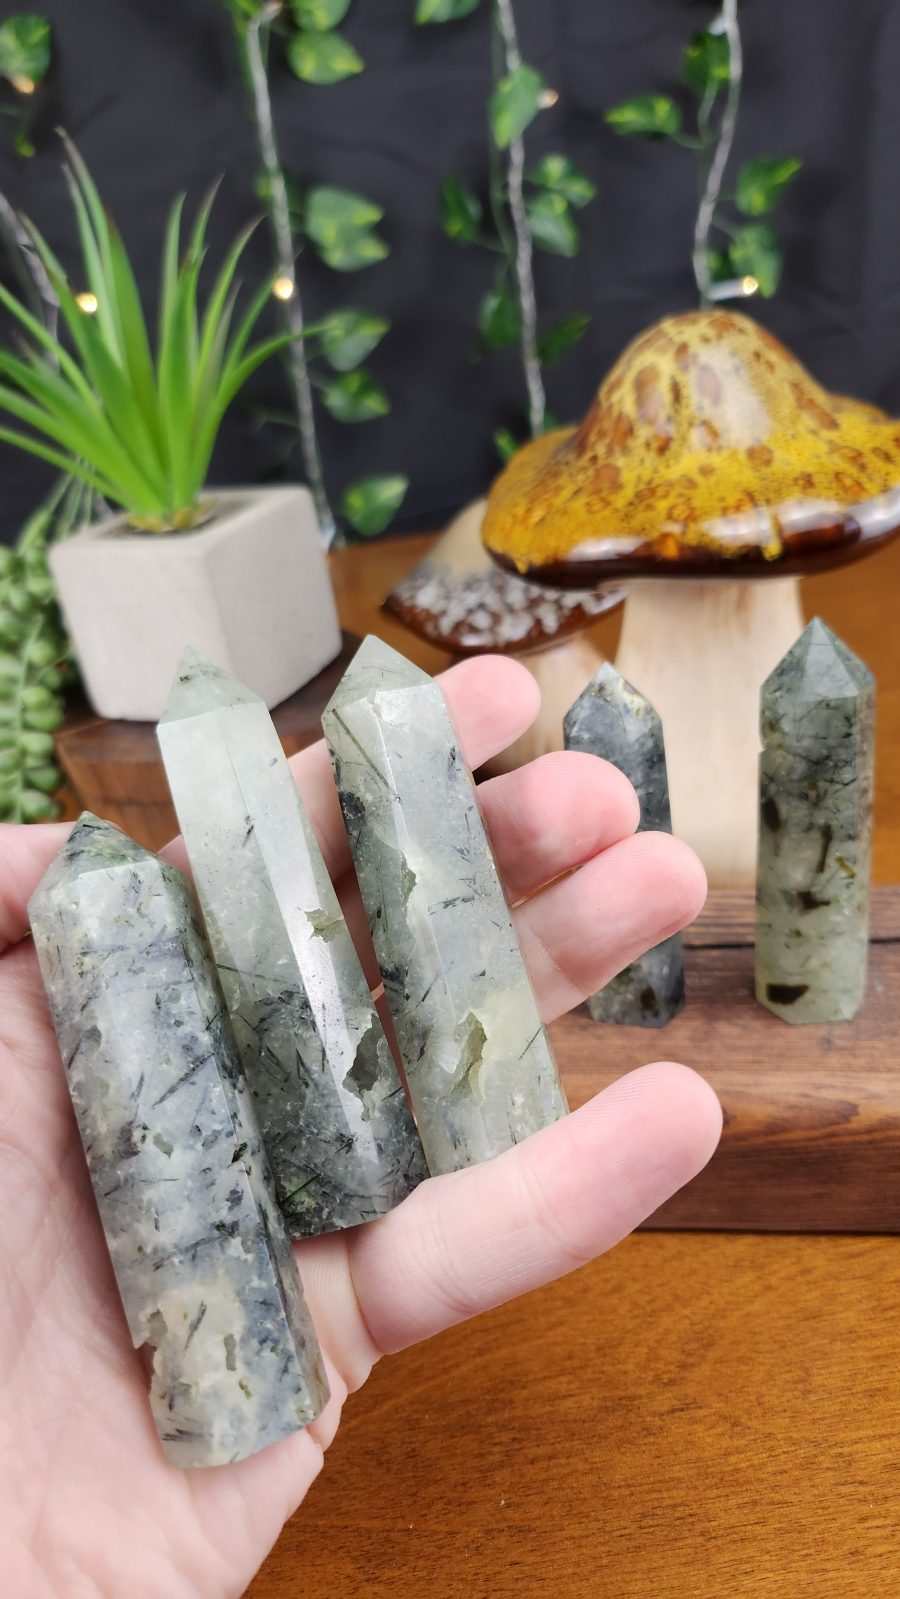 Prehnite Crystal Points shown in hand for scale.